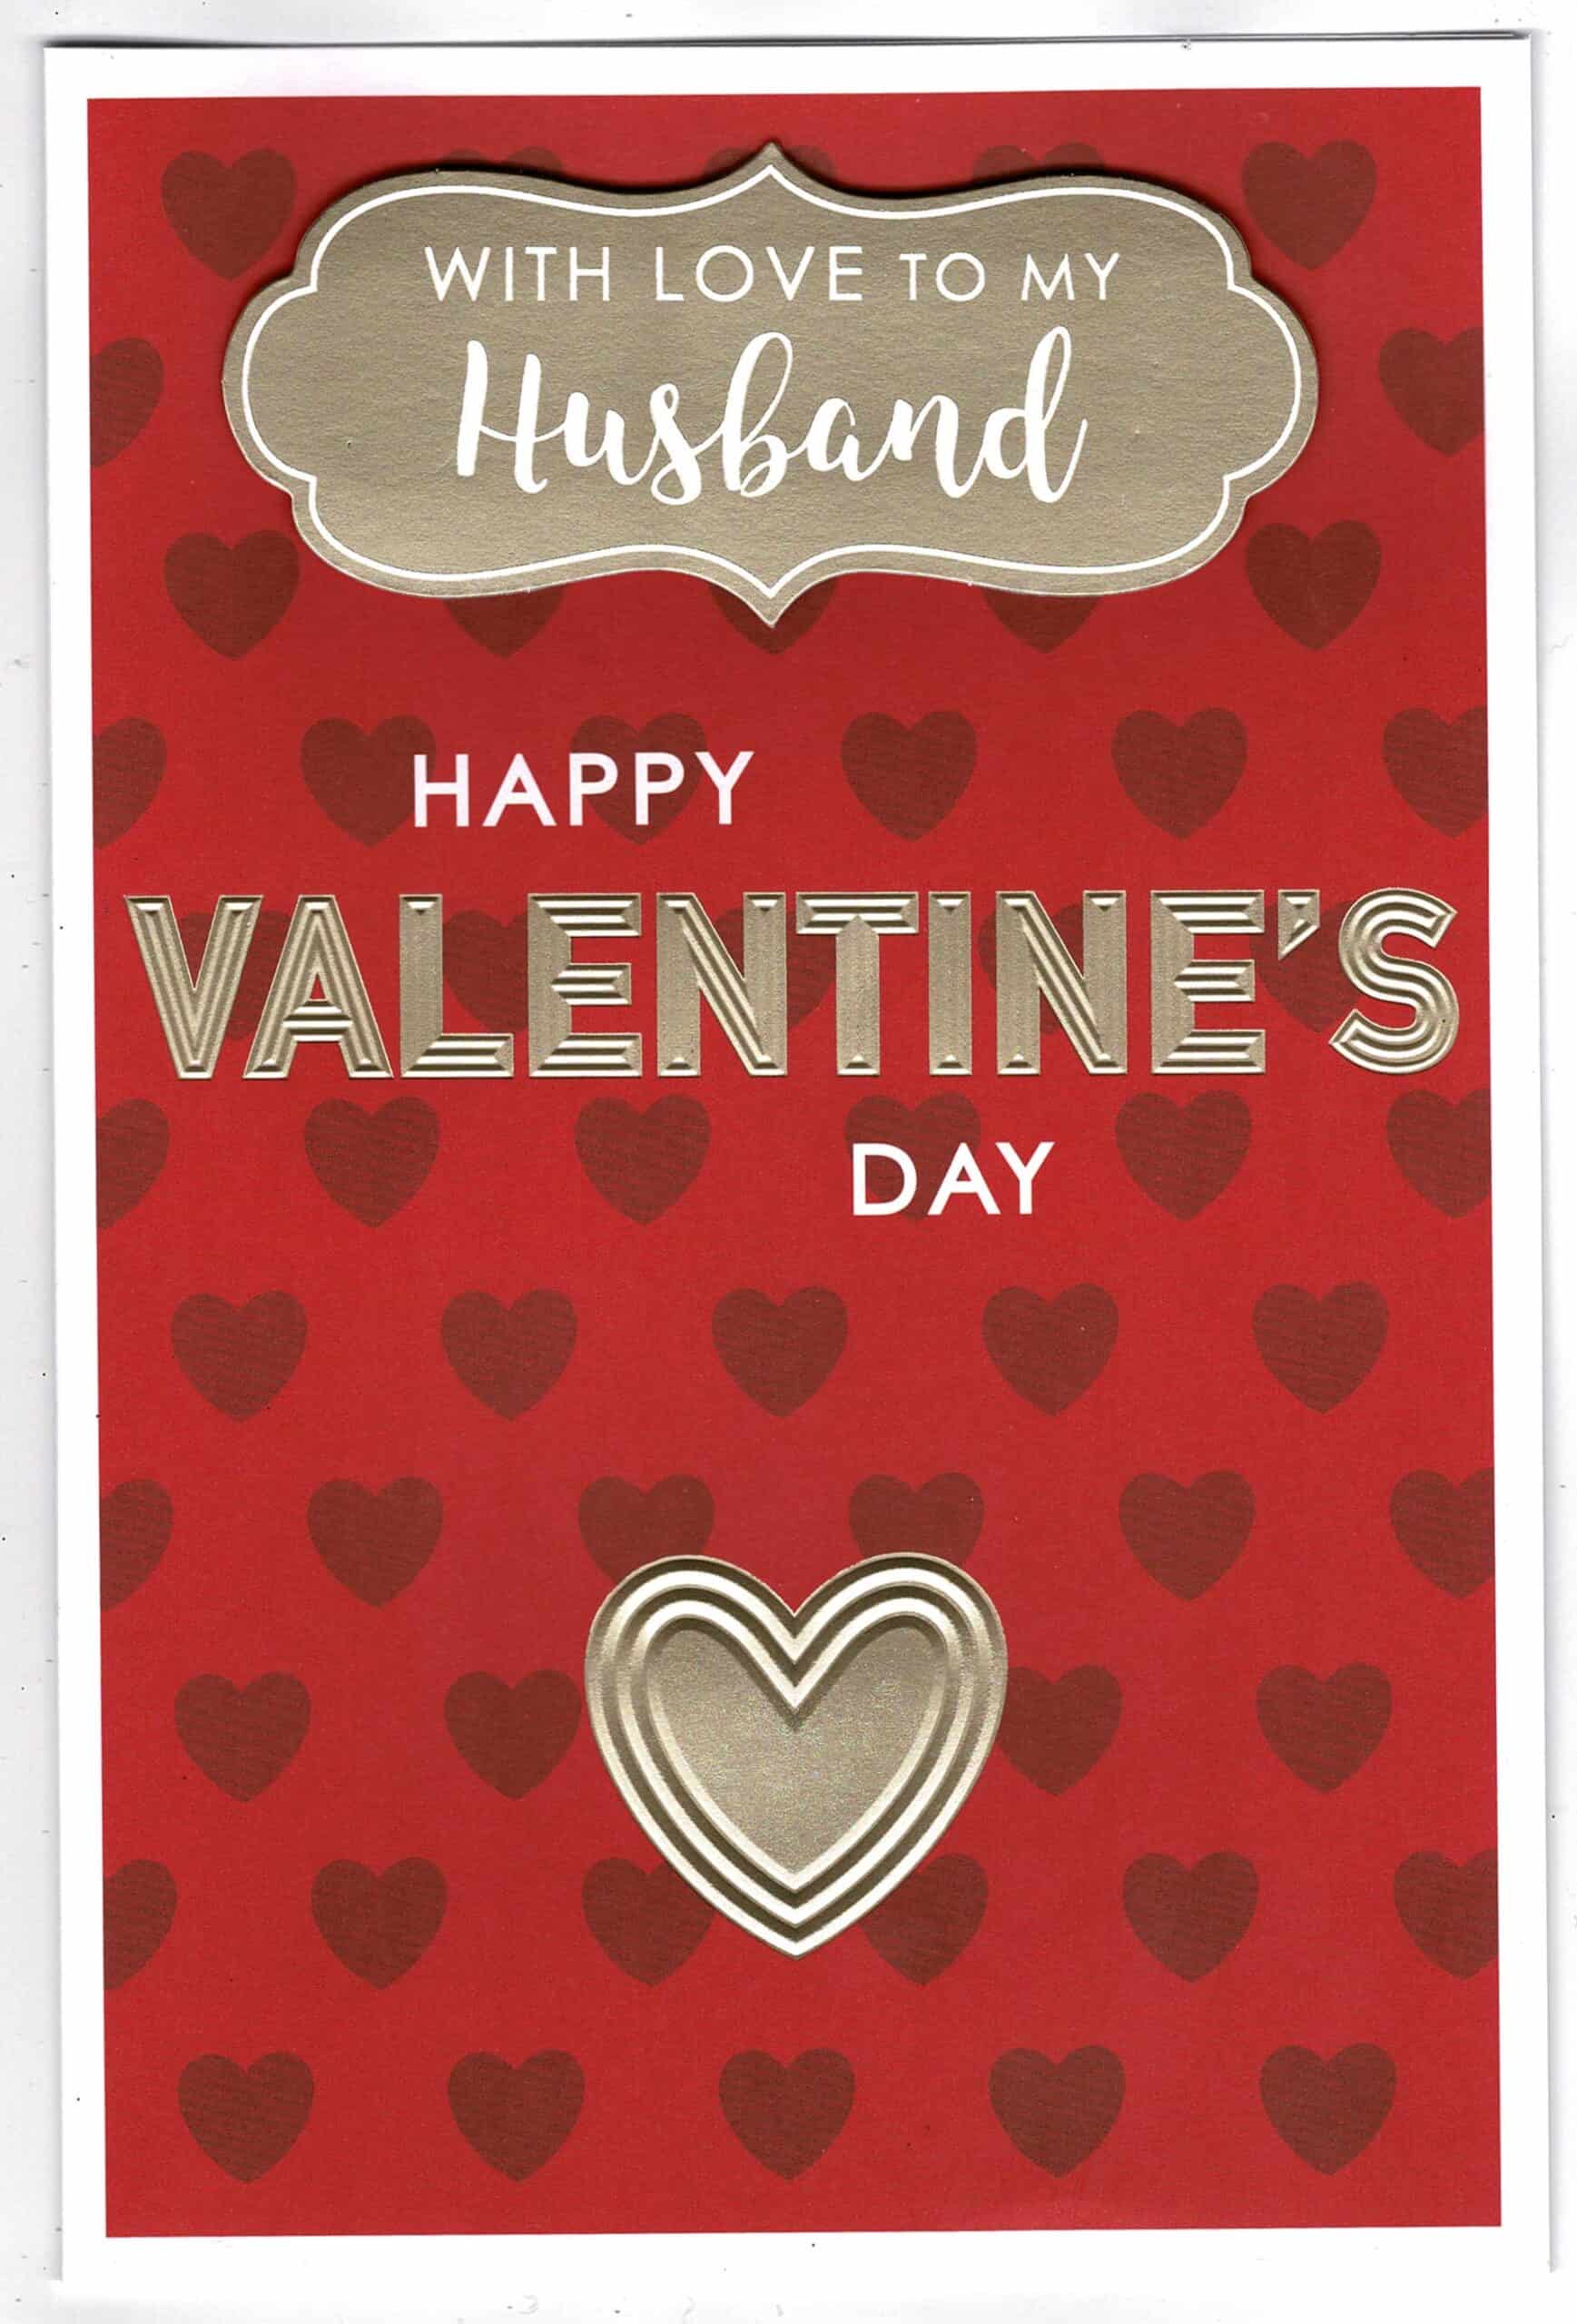 Husband Valentines Card 'With Love To My Husband Happy Valentines Day' 5057912252473 | eBay